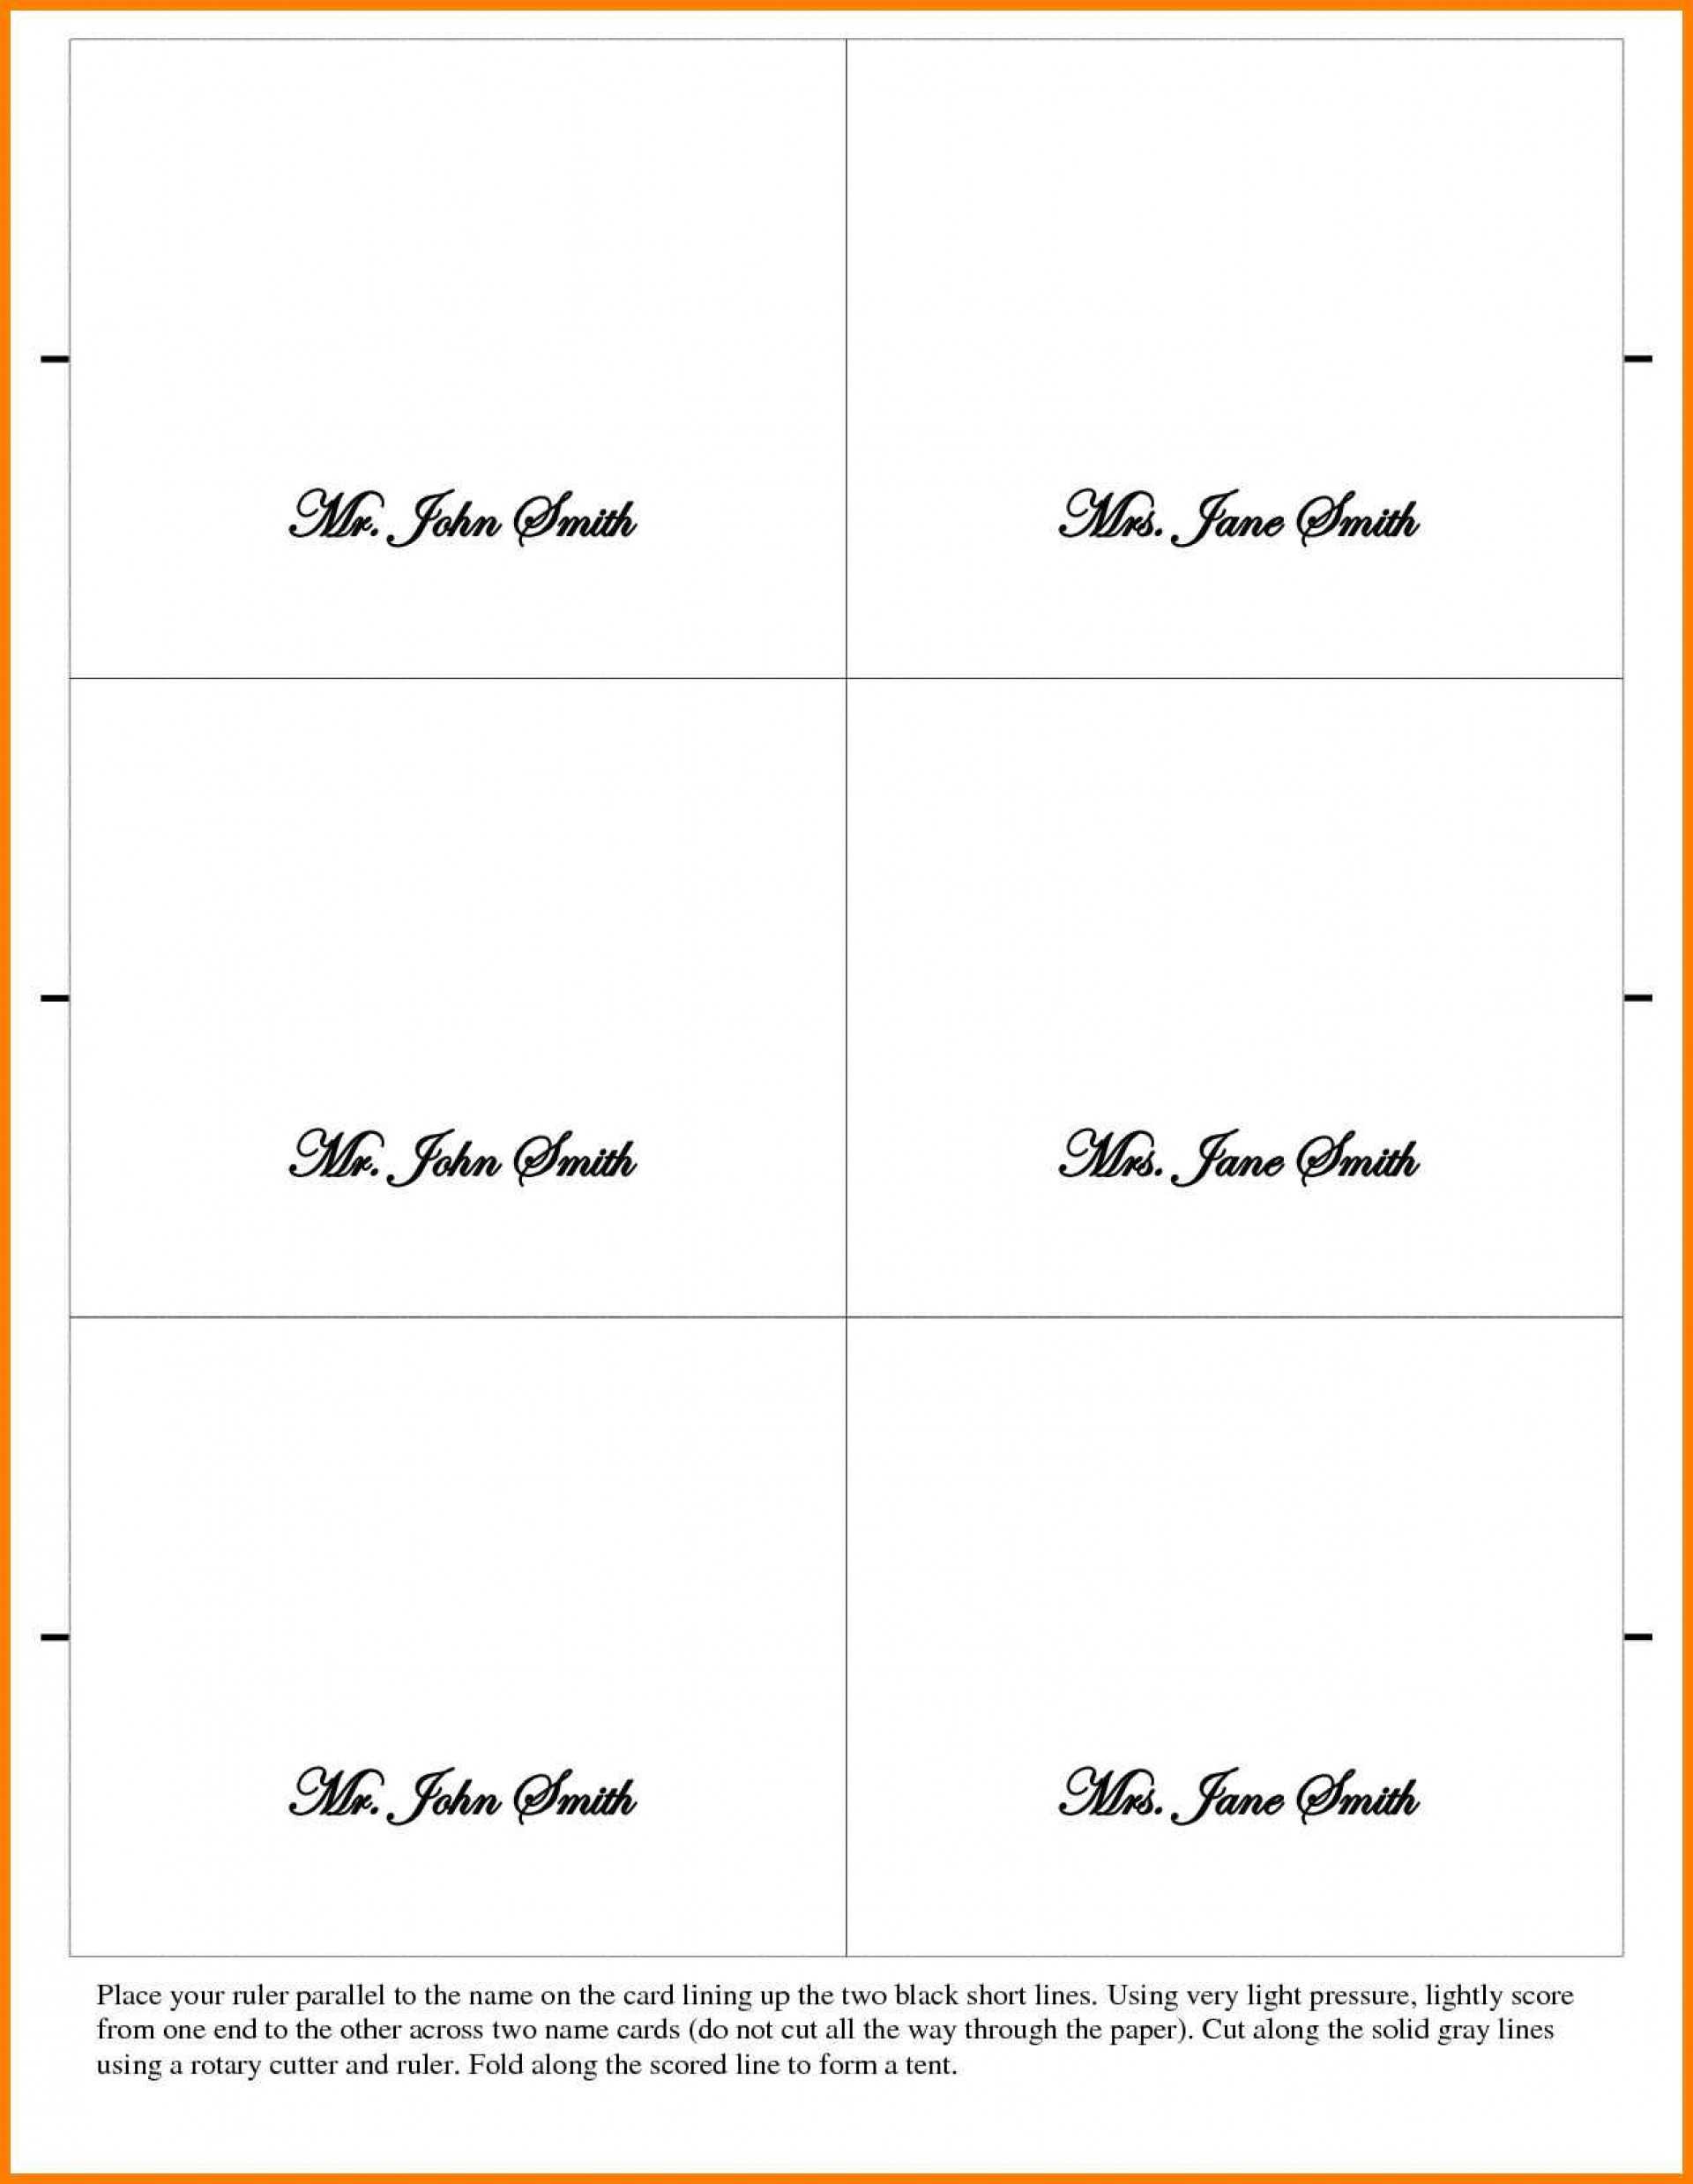 033 Place Card Template Word Flat 1024X1024V1462918202 Regarding Imprintable Place Cards Template